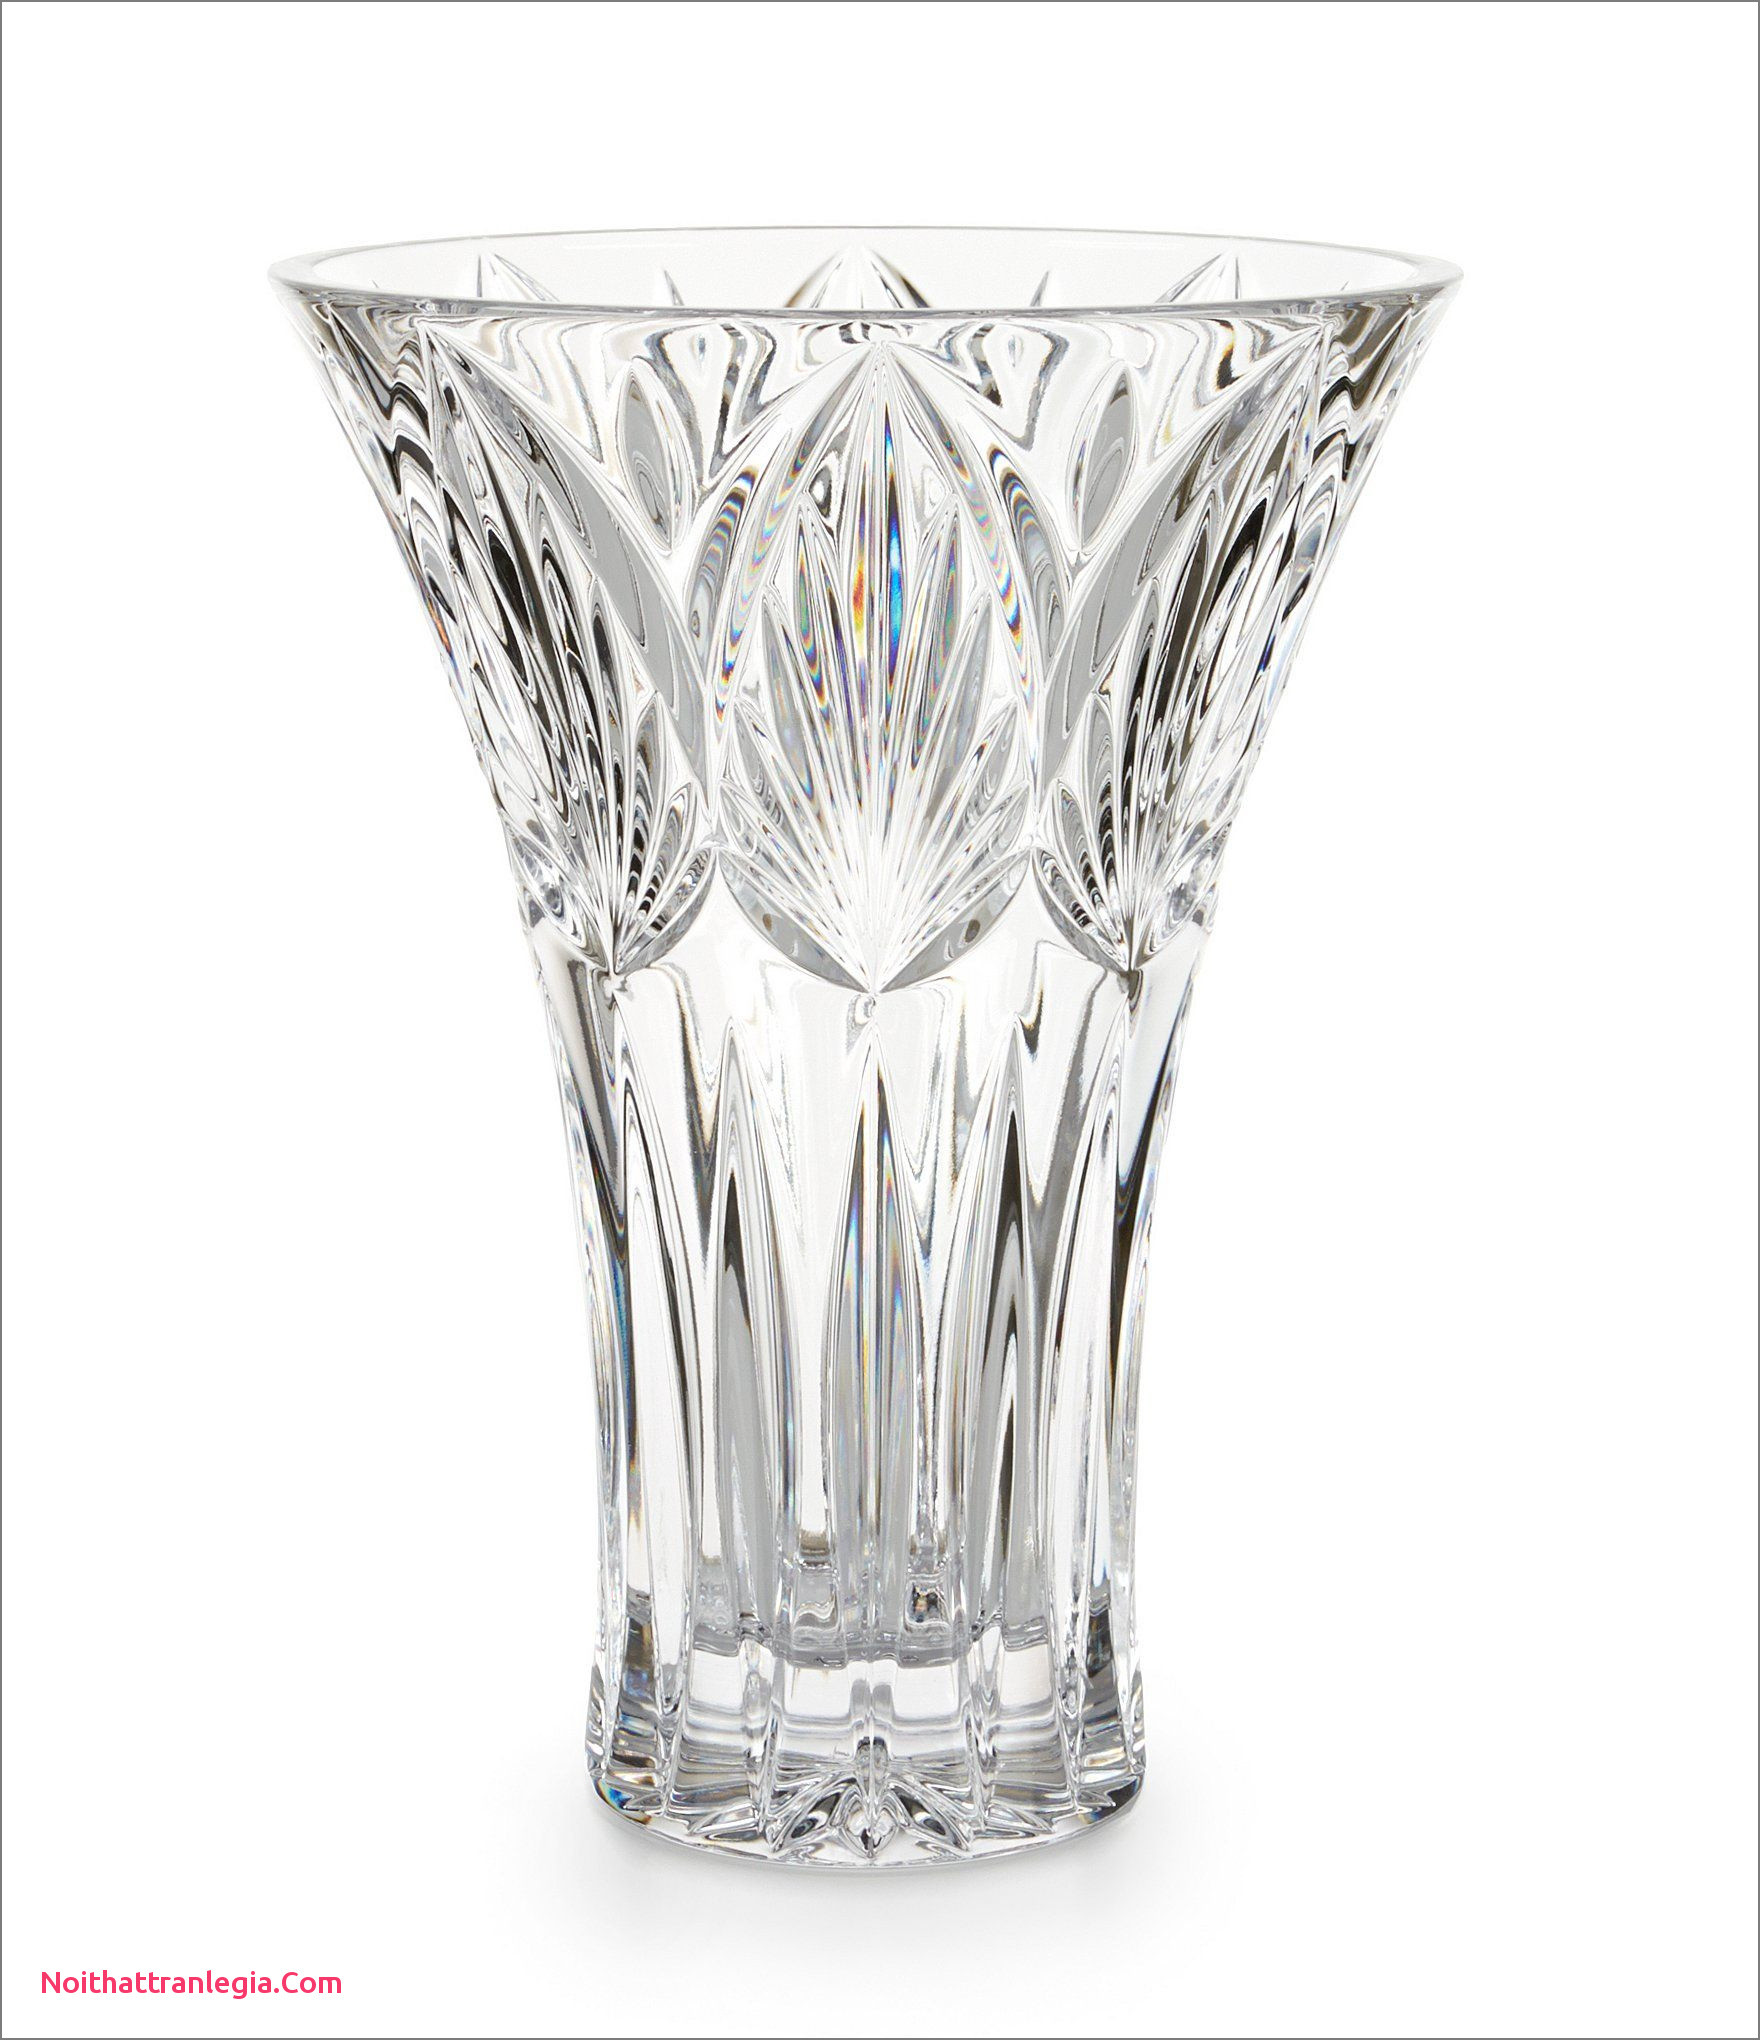 24 Amazing 20 Inch Clear Glass Vase 2022 free download 20 inch clear glass vase of 20 large waterford crystal vase noithattranlegia vases design throughout large waterford crystal vase best of waterford westbridge crystal vase of large waterford